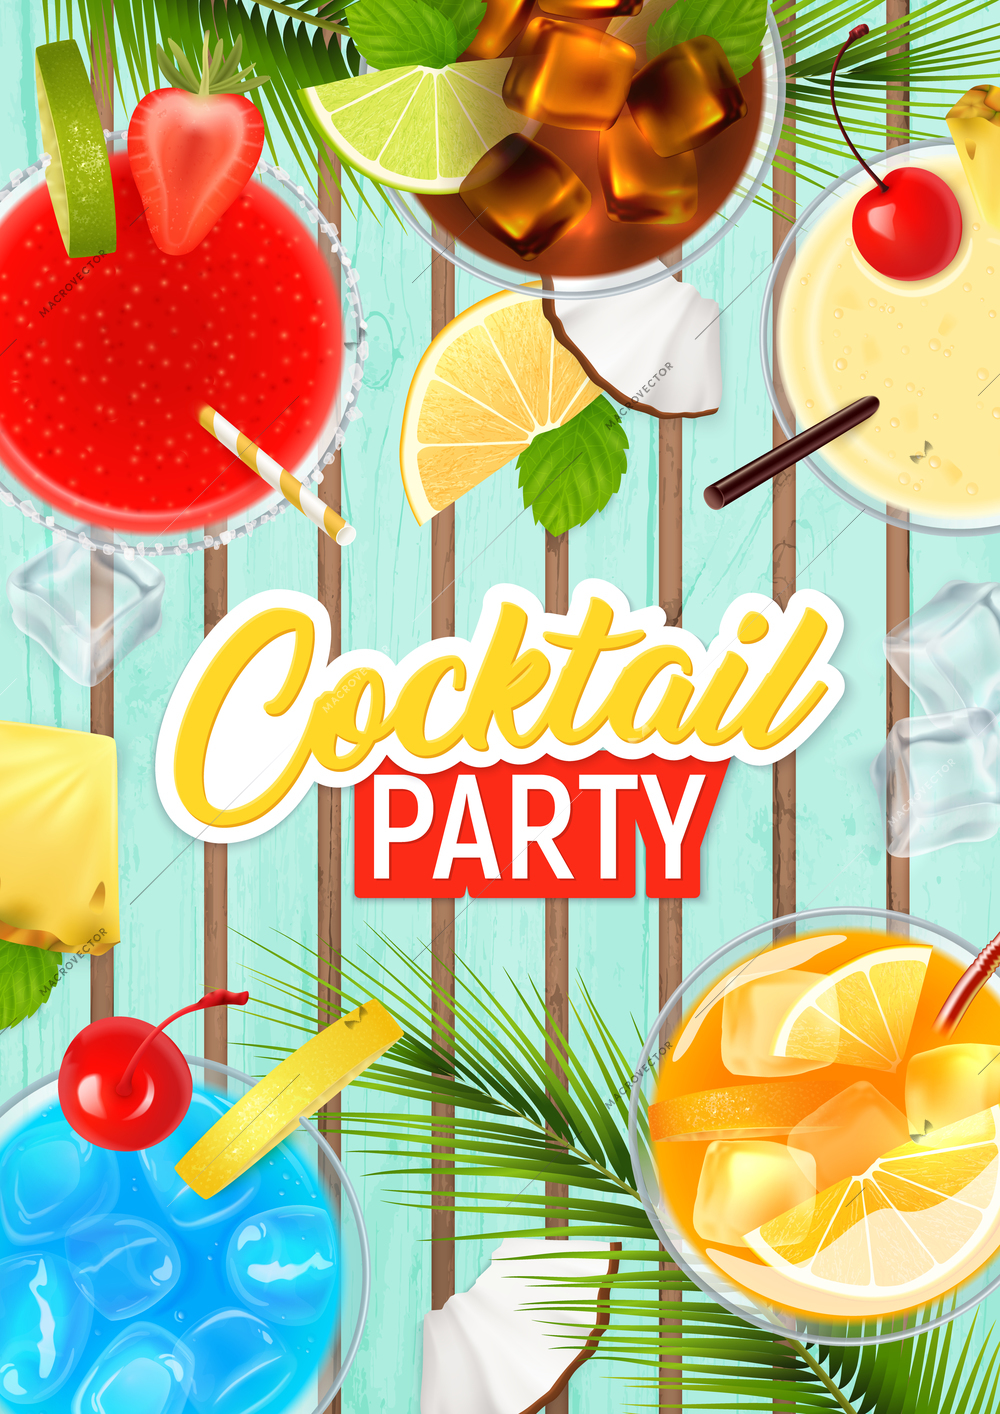 Cocktail party realistic poster with tropical fruit and alcohol vector illustration